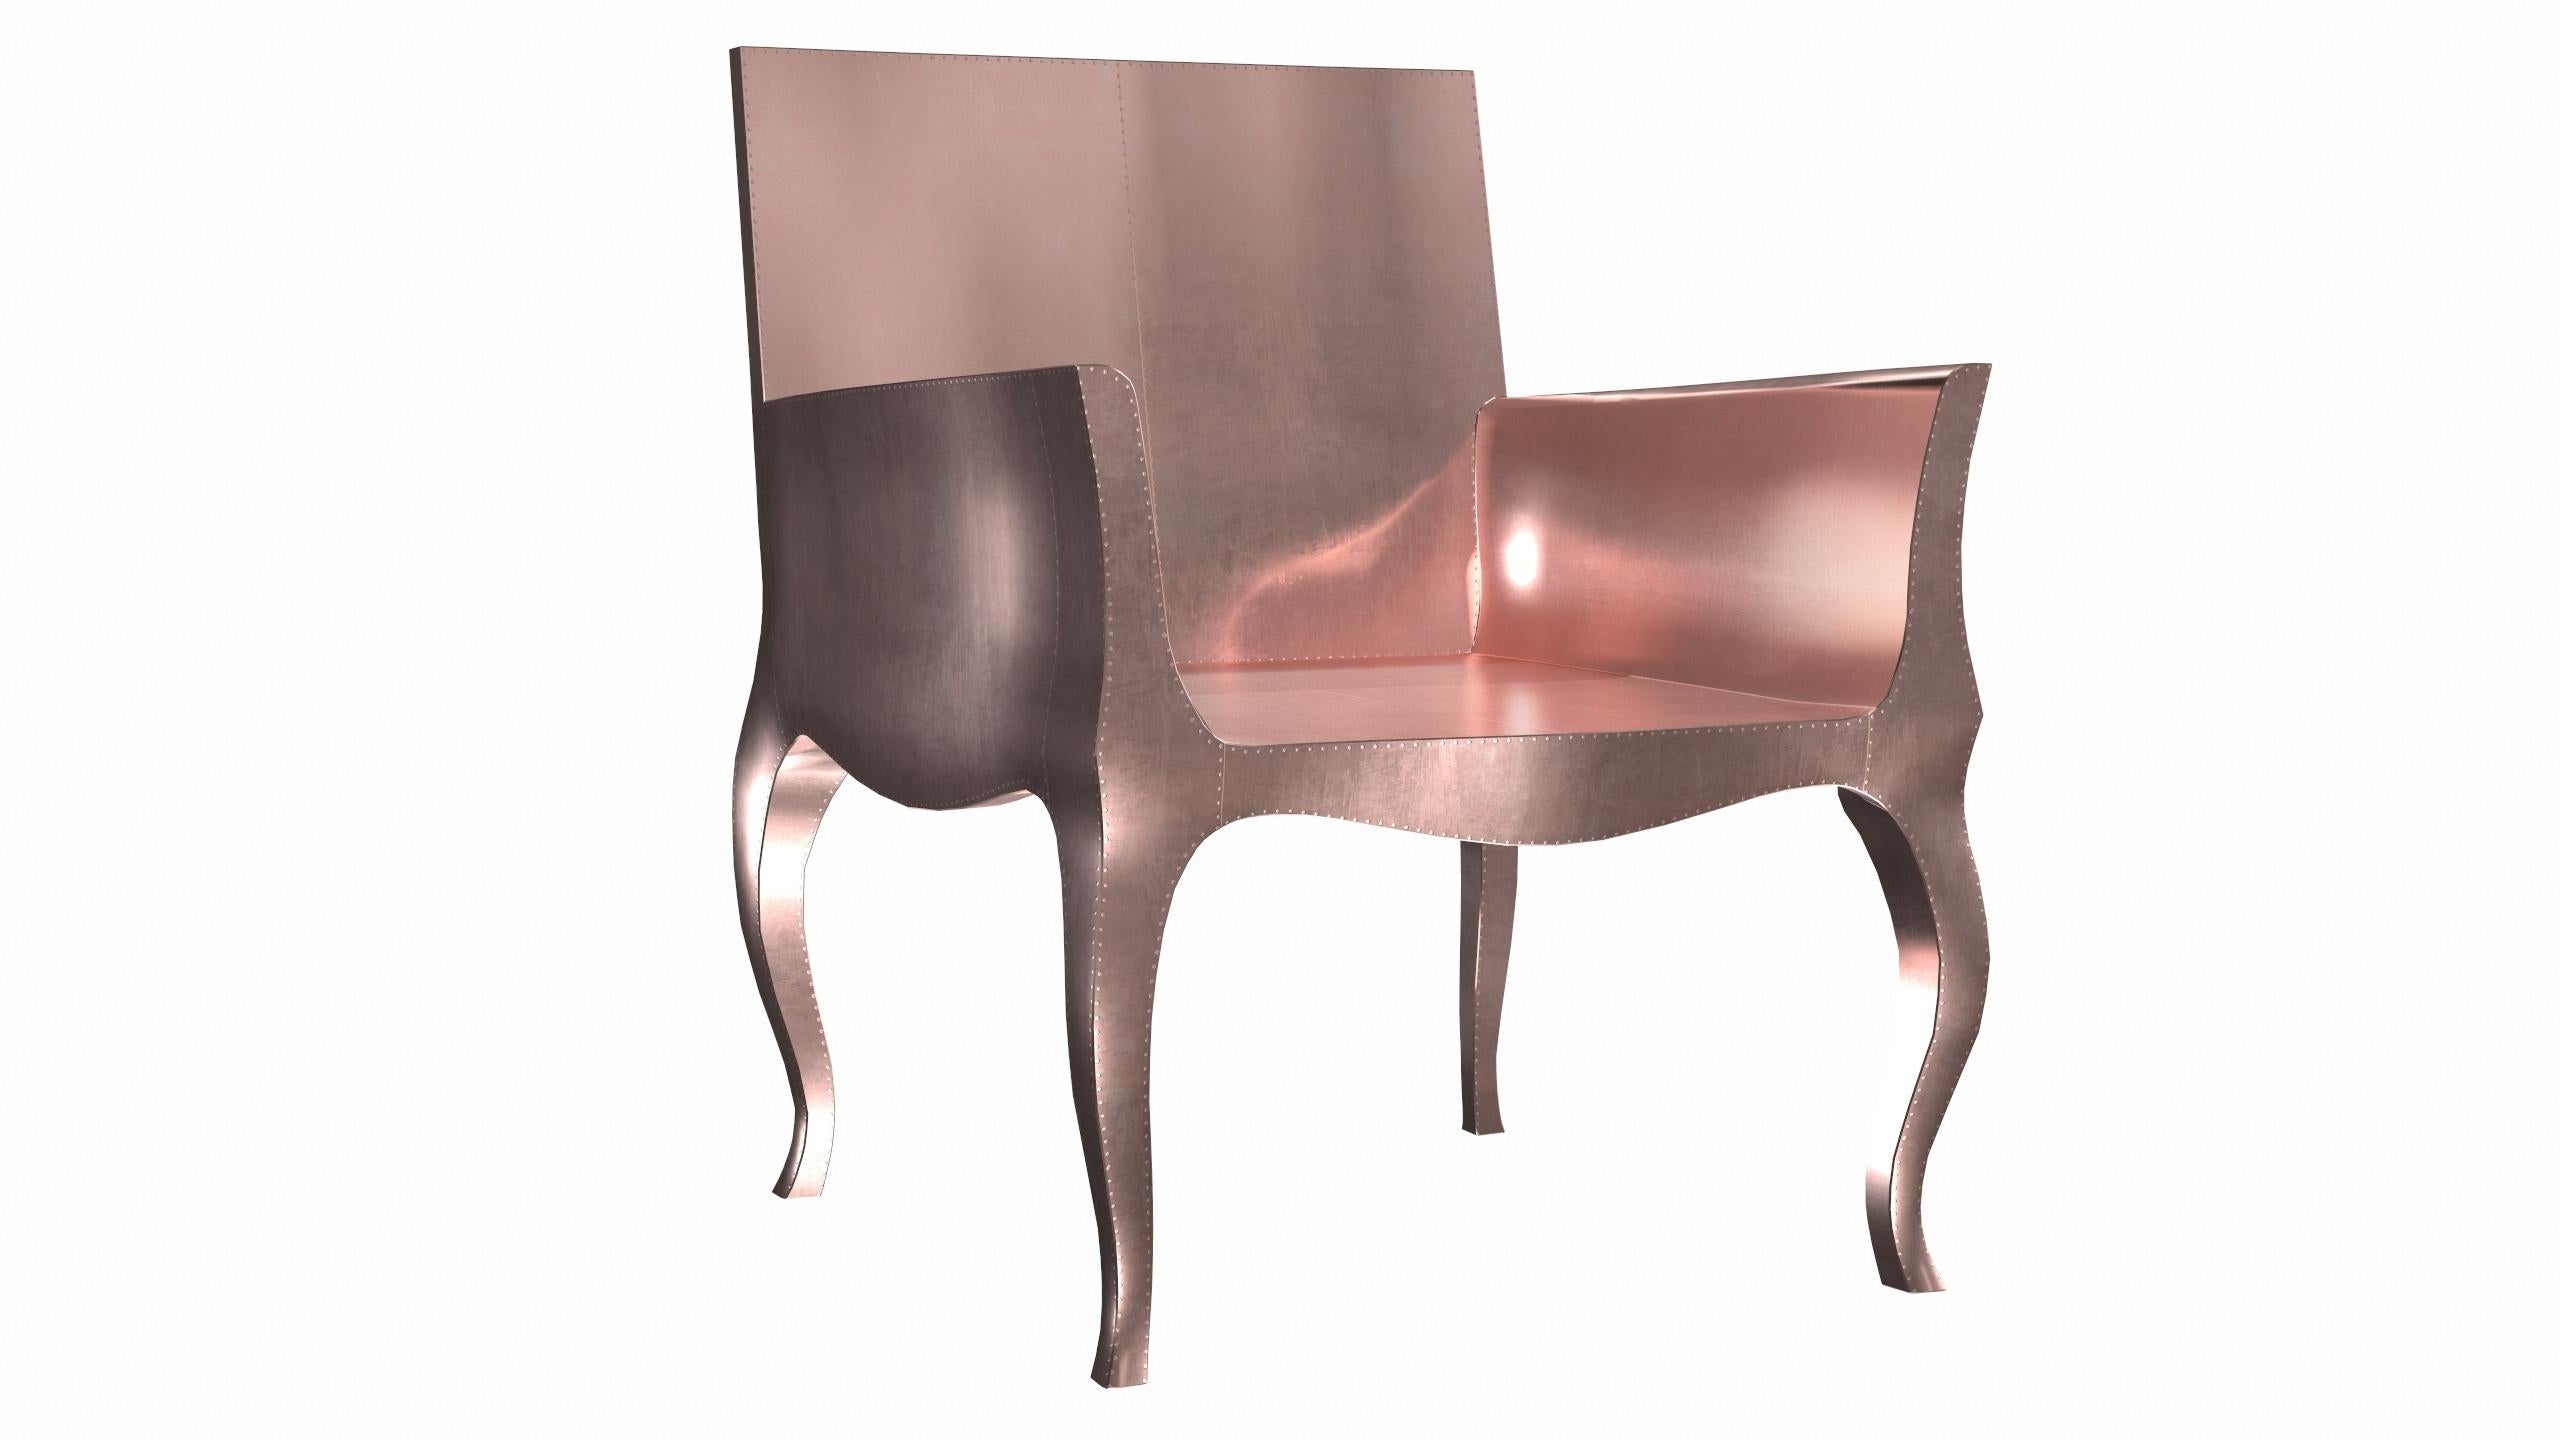 Art Deco Style Chairs in Smooth Copper by Paul Mathieu for S. Odegard In New Condition For Sale In New York, NY